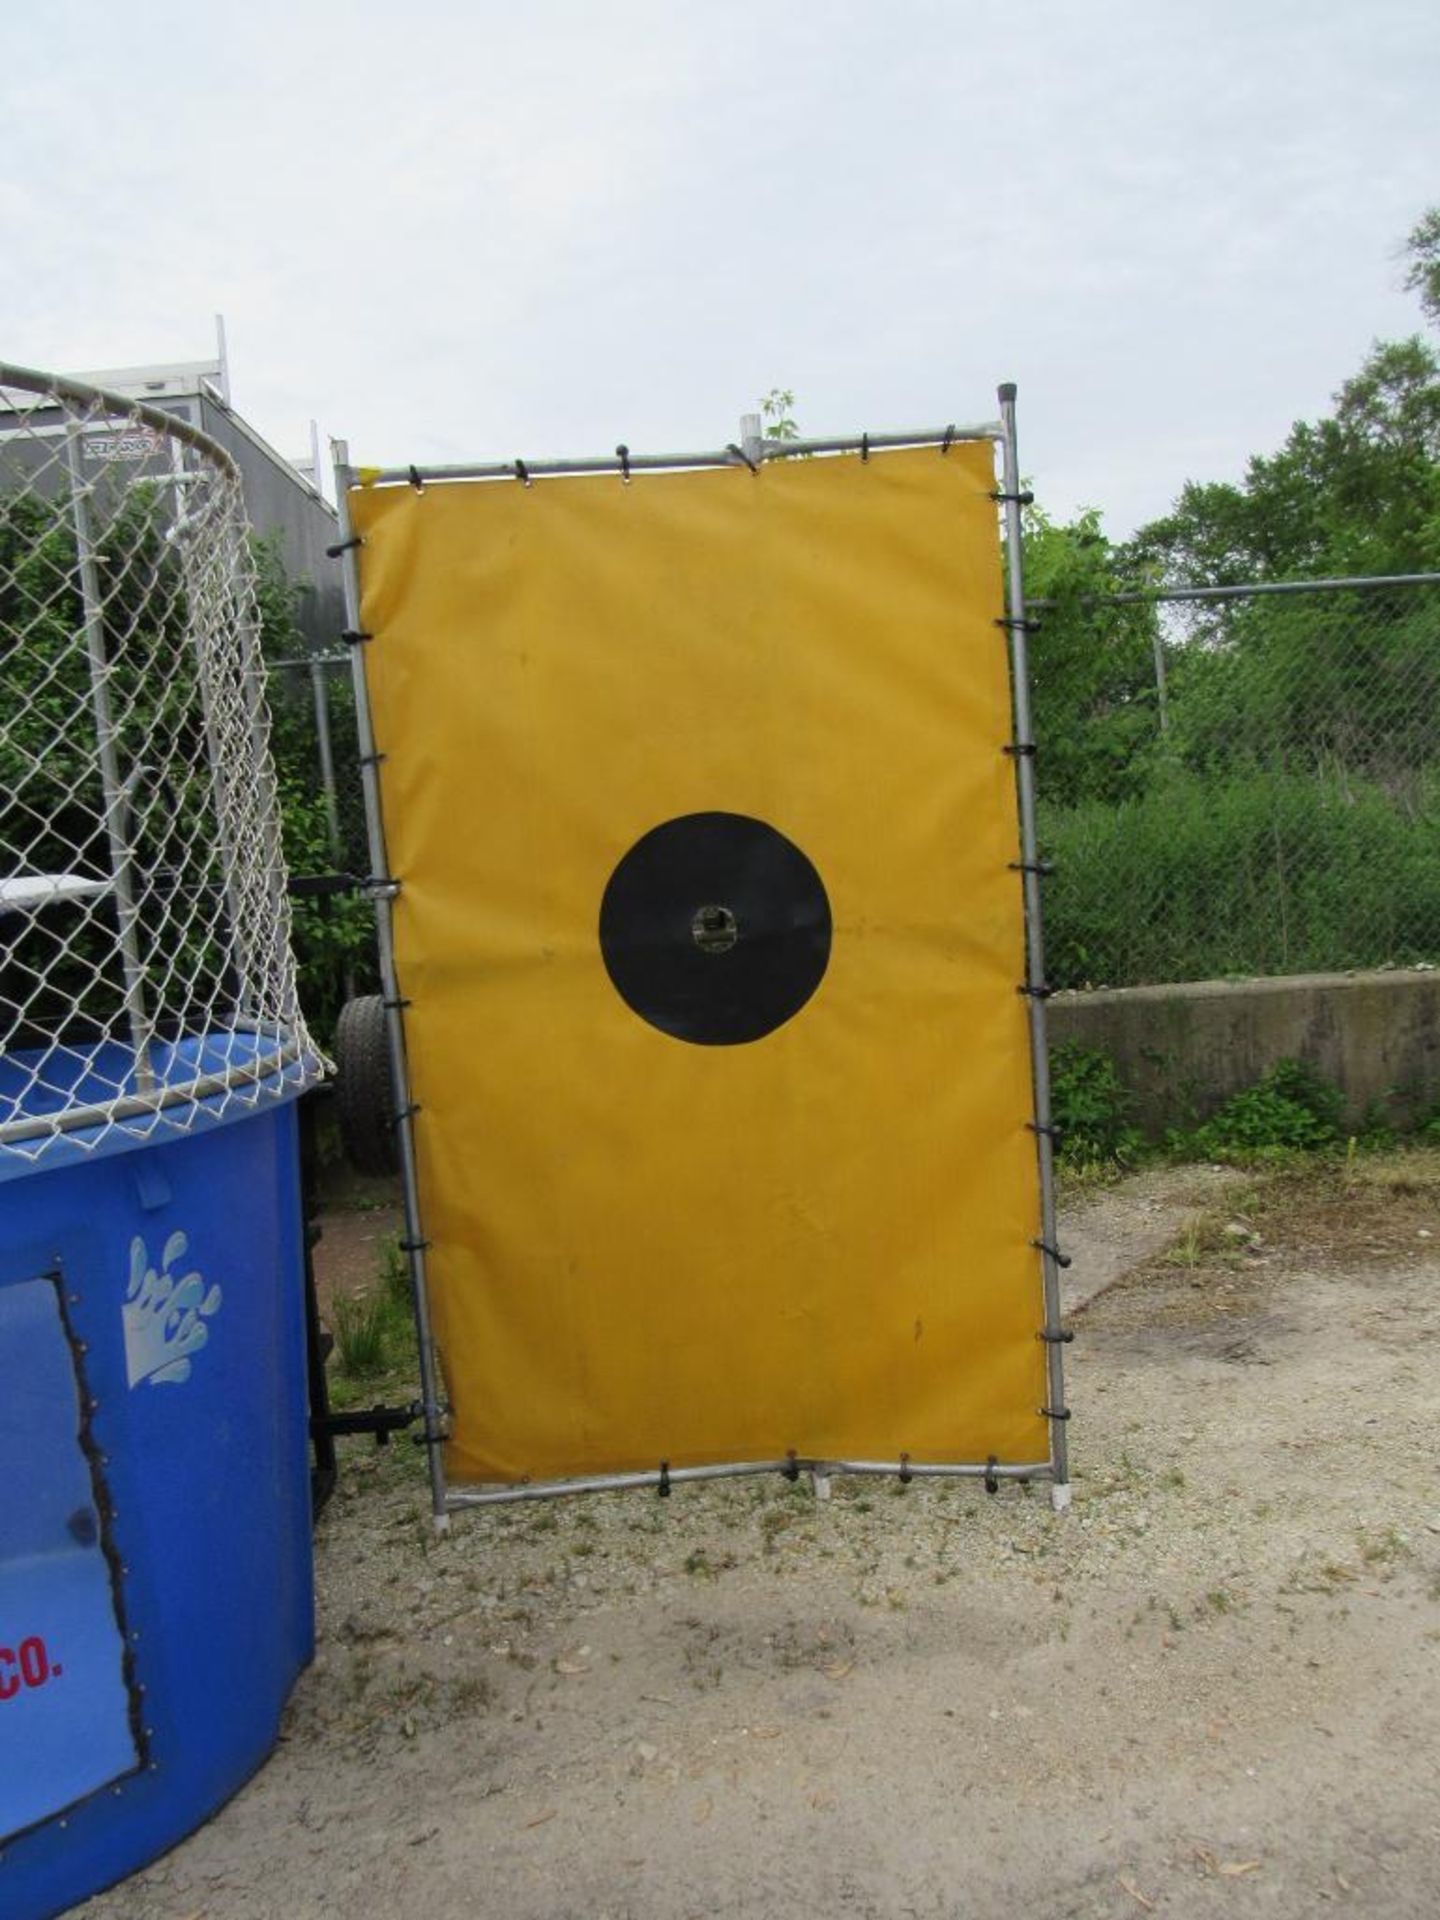 Dunk Tank Trailer mounted - includes bucket of balls, target and activation arm. See Lot 24A Misc. D - Image 2 of 4